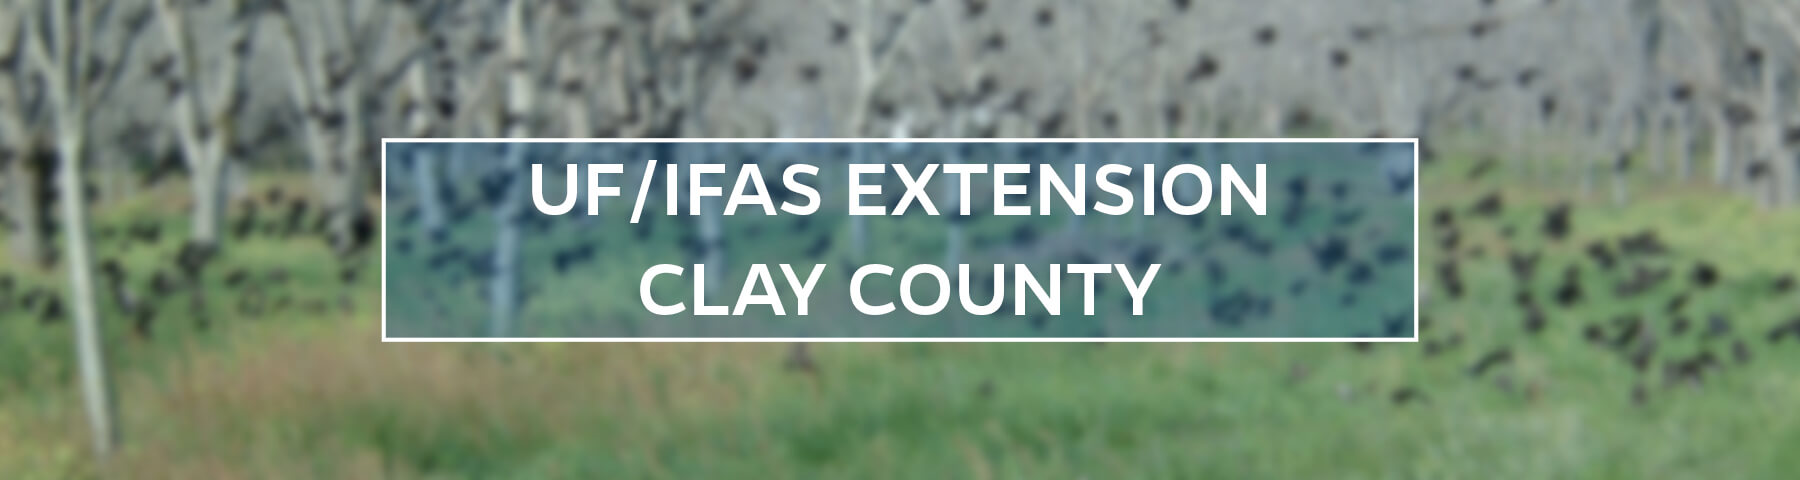 UF/IFAS Extension Clay County